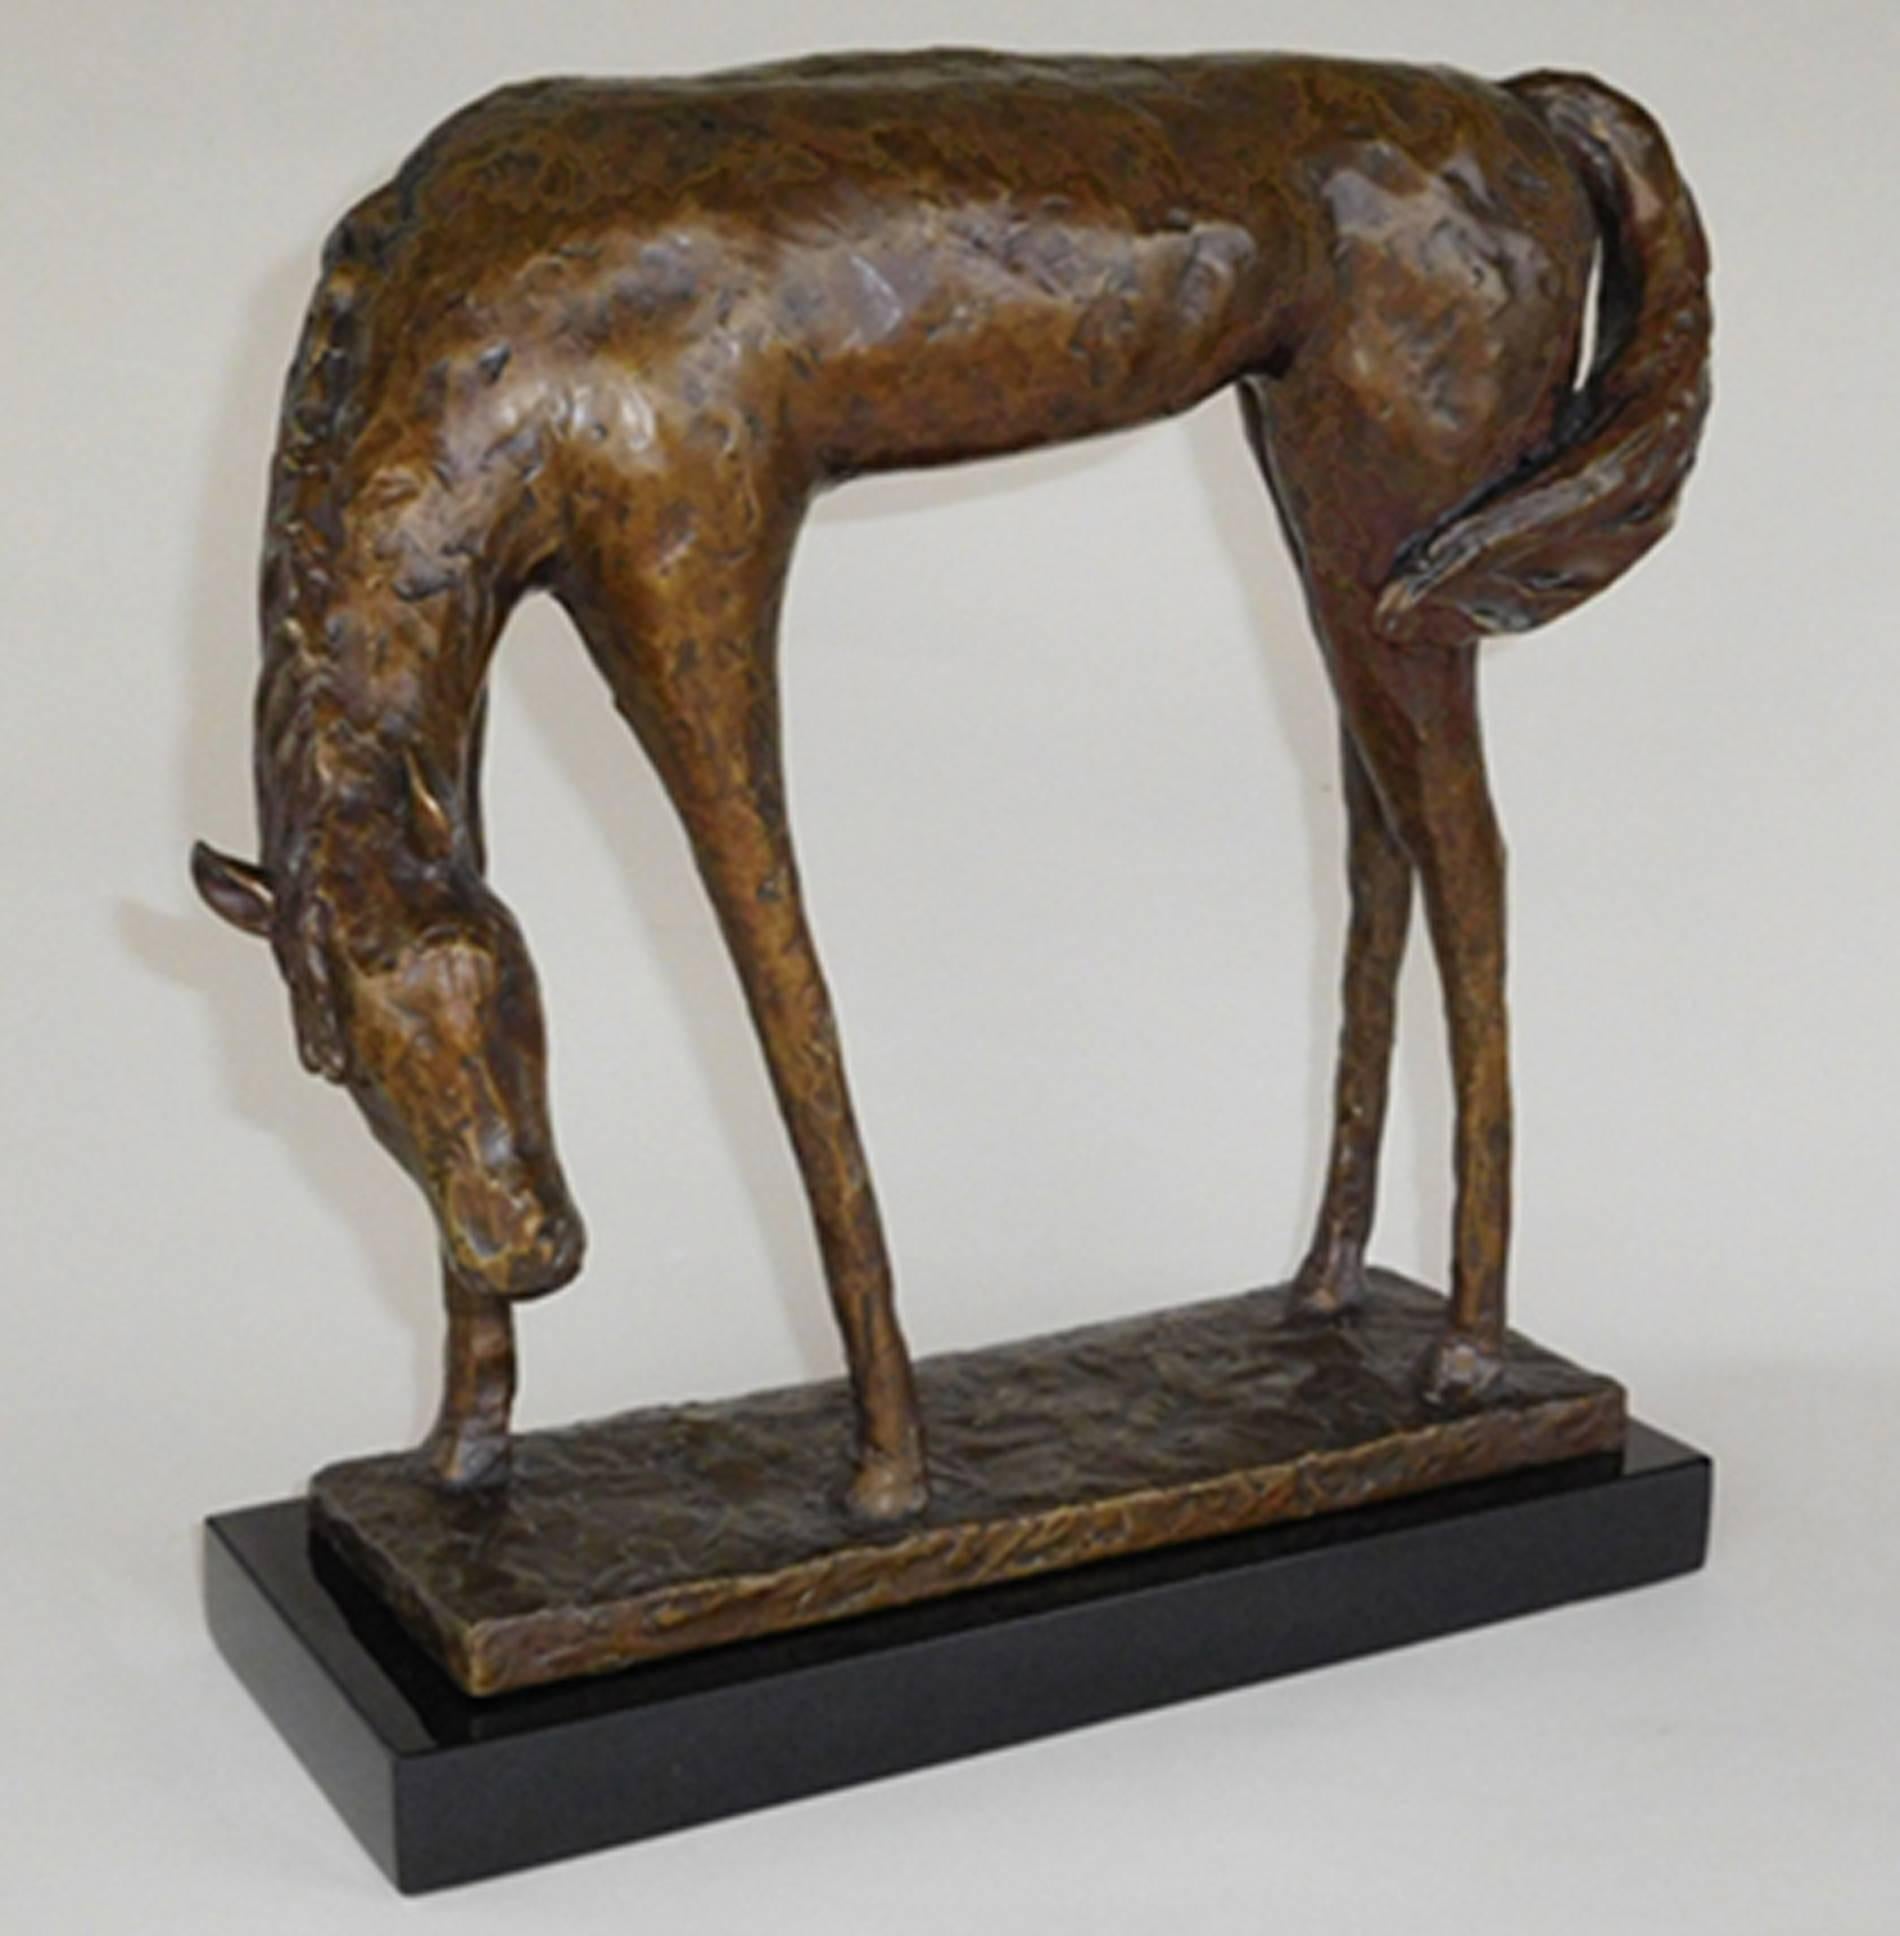 A limited edition bronze Horse on a black marble base.

From the limited edition of 8. 
Signed 1/8

Paula Blackman has been a bronze sculptor for 30 years working in Cleveland Ohio. Ms. Blackman has been granted eleven Public Art commissions.  She